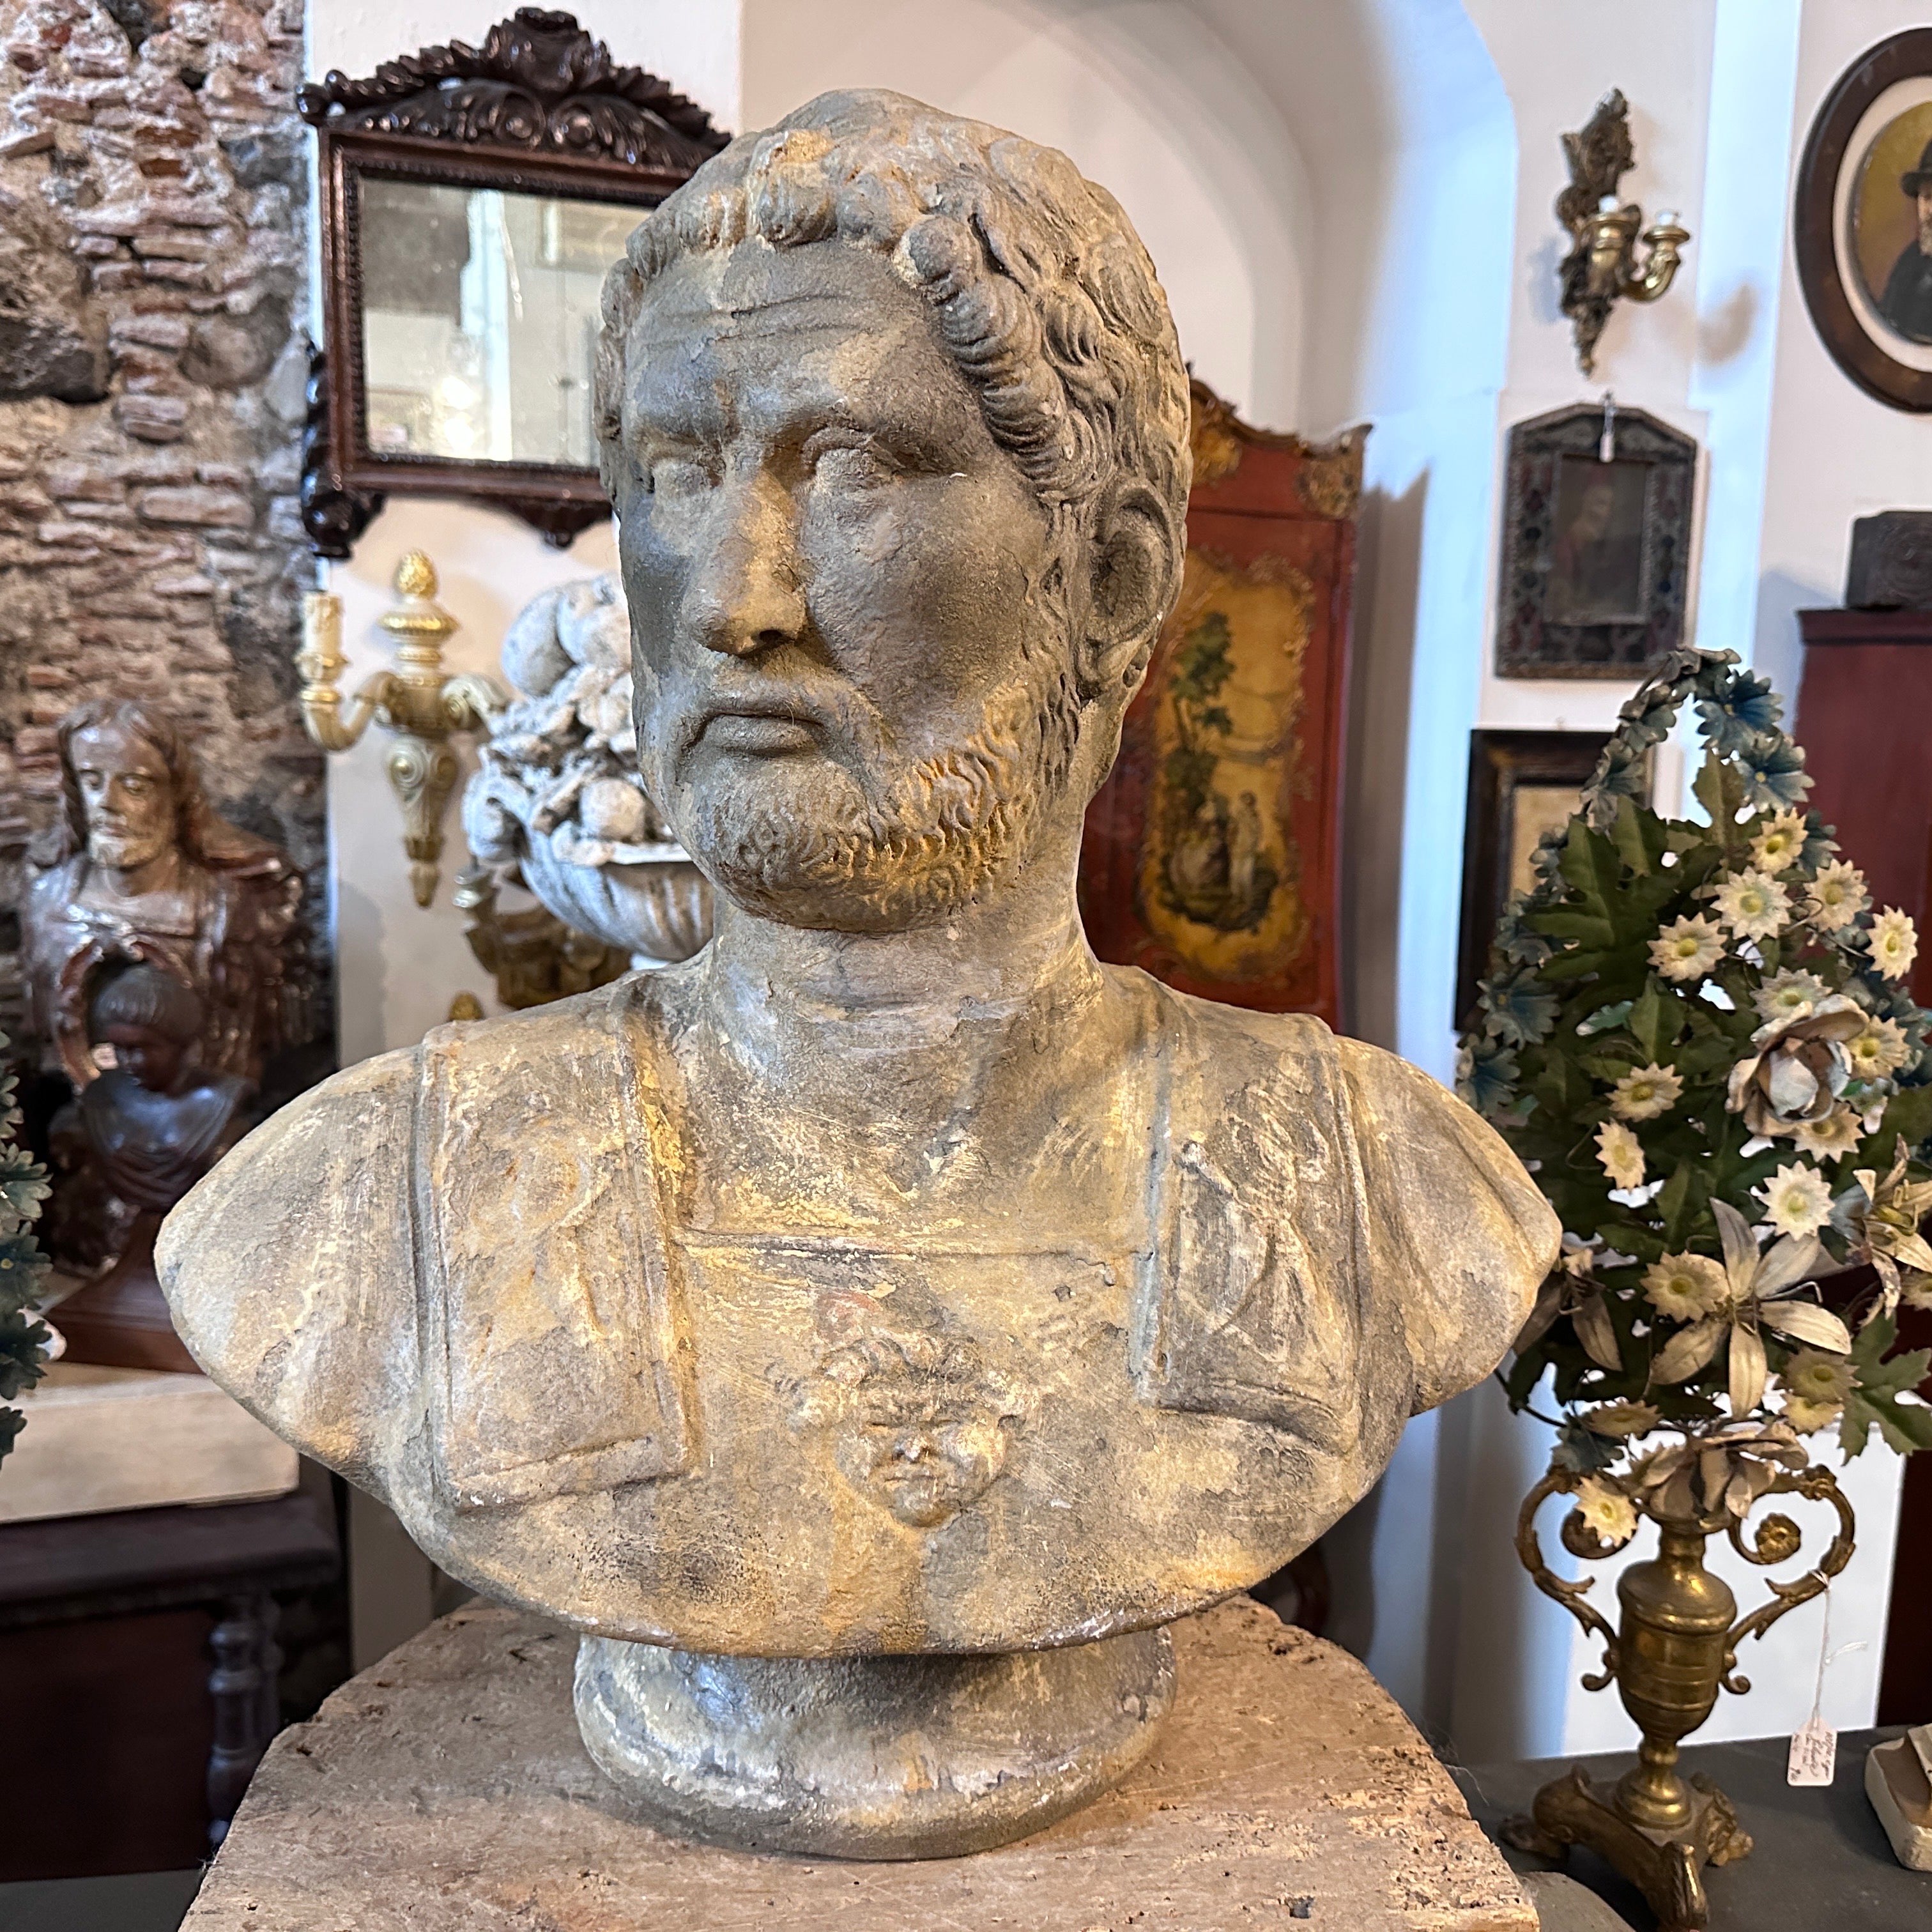 An original patina terracotta bust hand-crafted in Siclly in the first half of 20th century, it has signs of use and age. The bust of the Roman Emperor Adriano is a captivating and finely crafted sculpture that reflects the artistic influences of